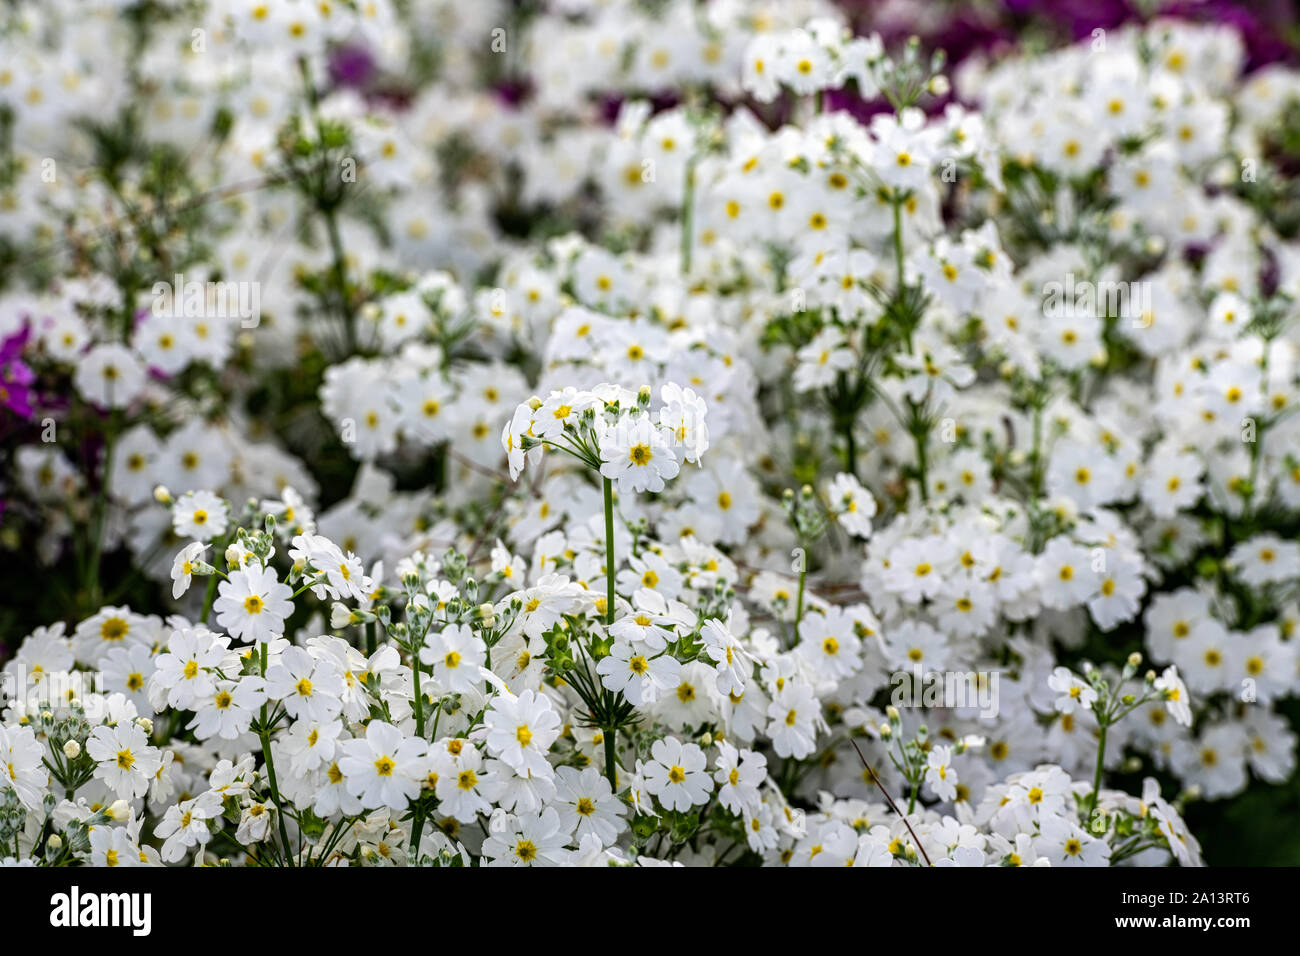 Clusters of white flowers Stock Photo